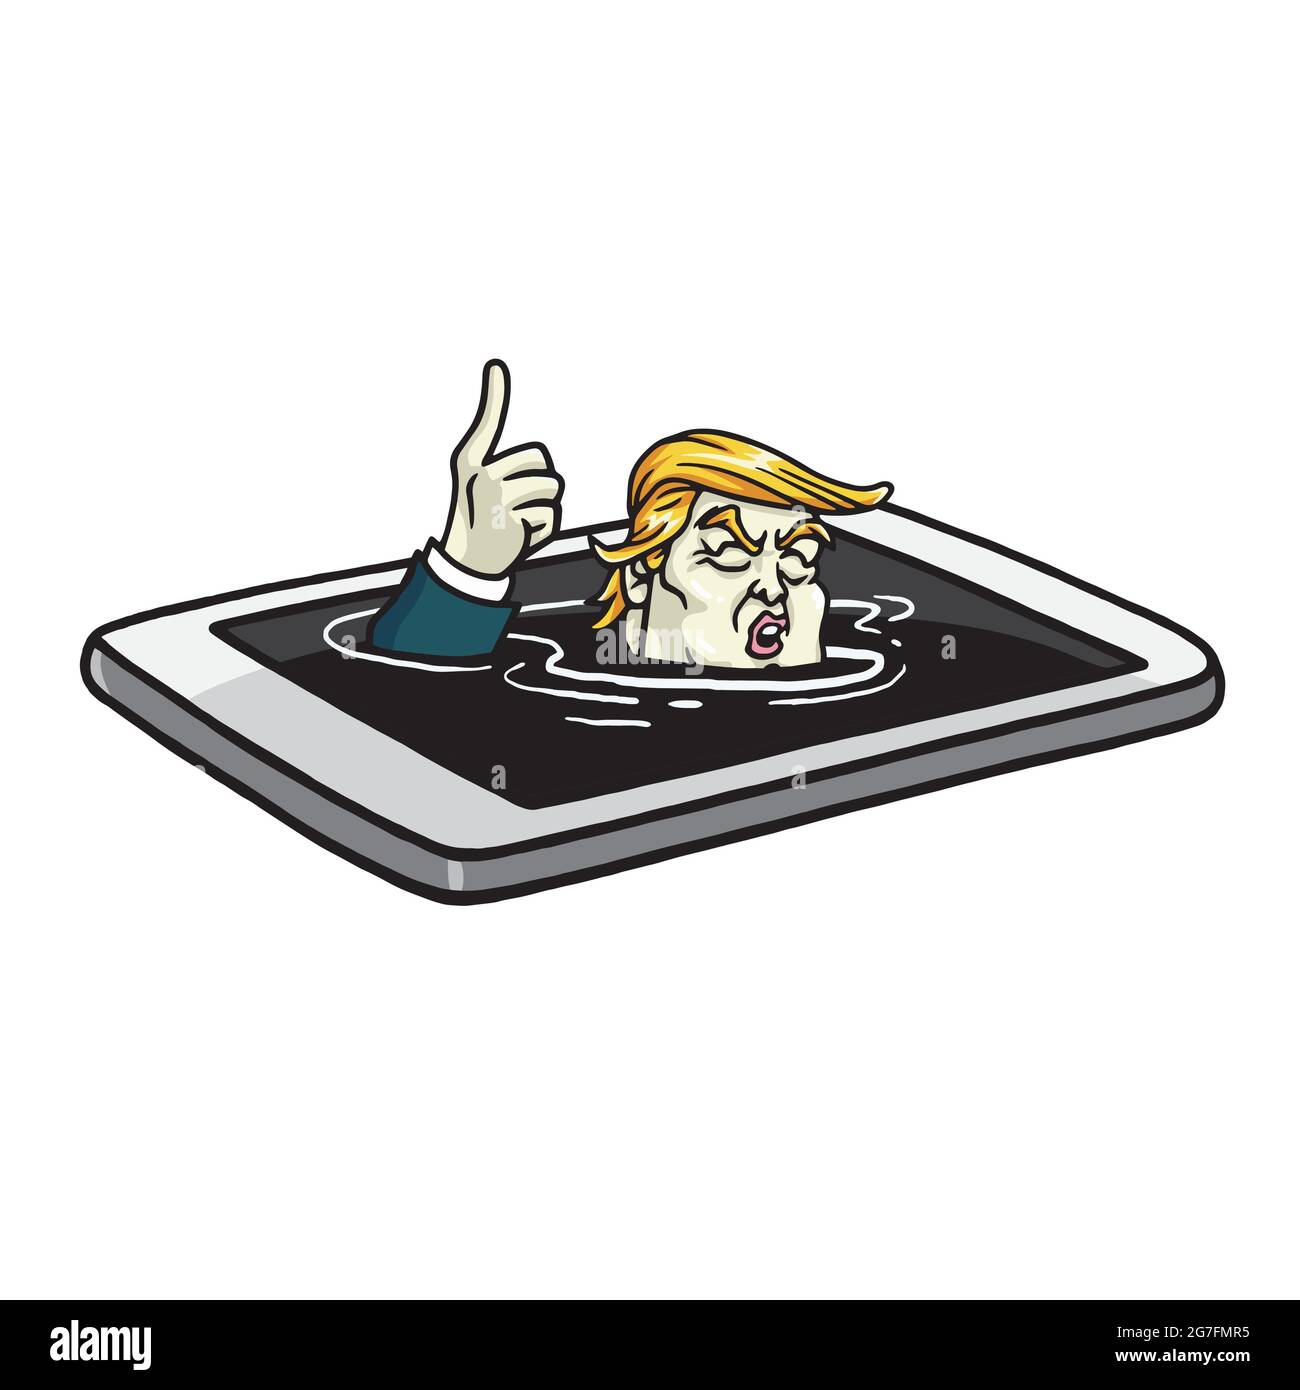 Donald Trump Drowning in Mobile Phone. Cartoon Illustration Vector Stock Vector